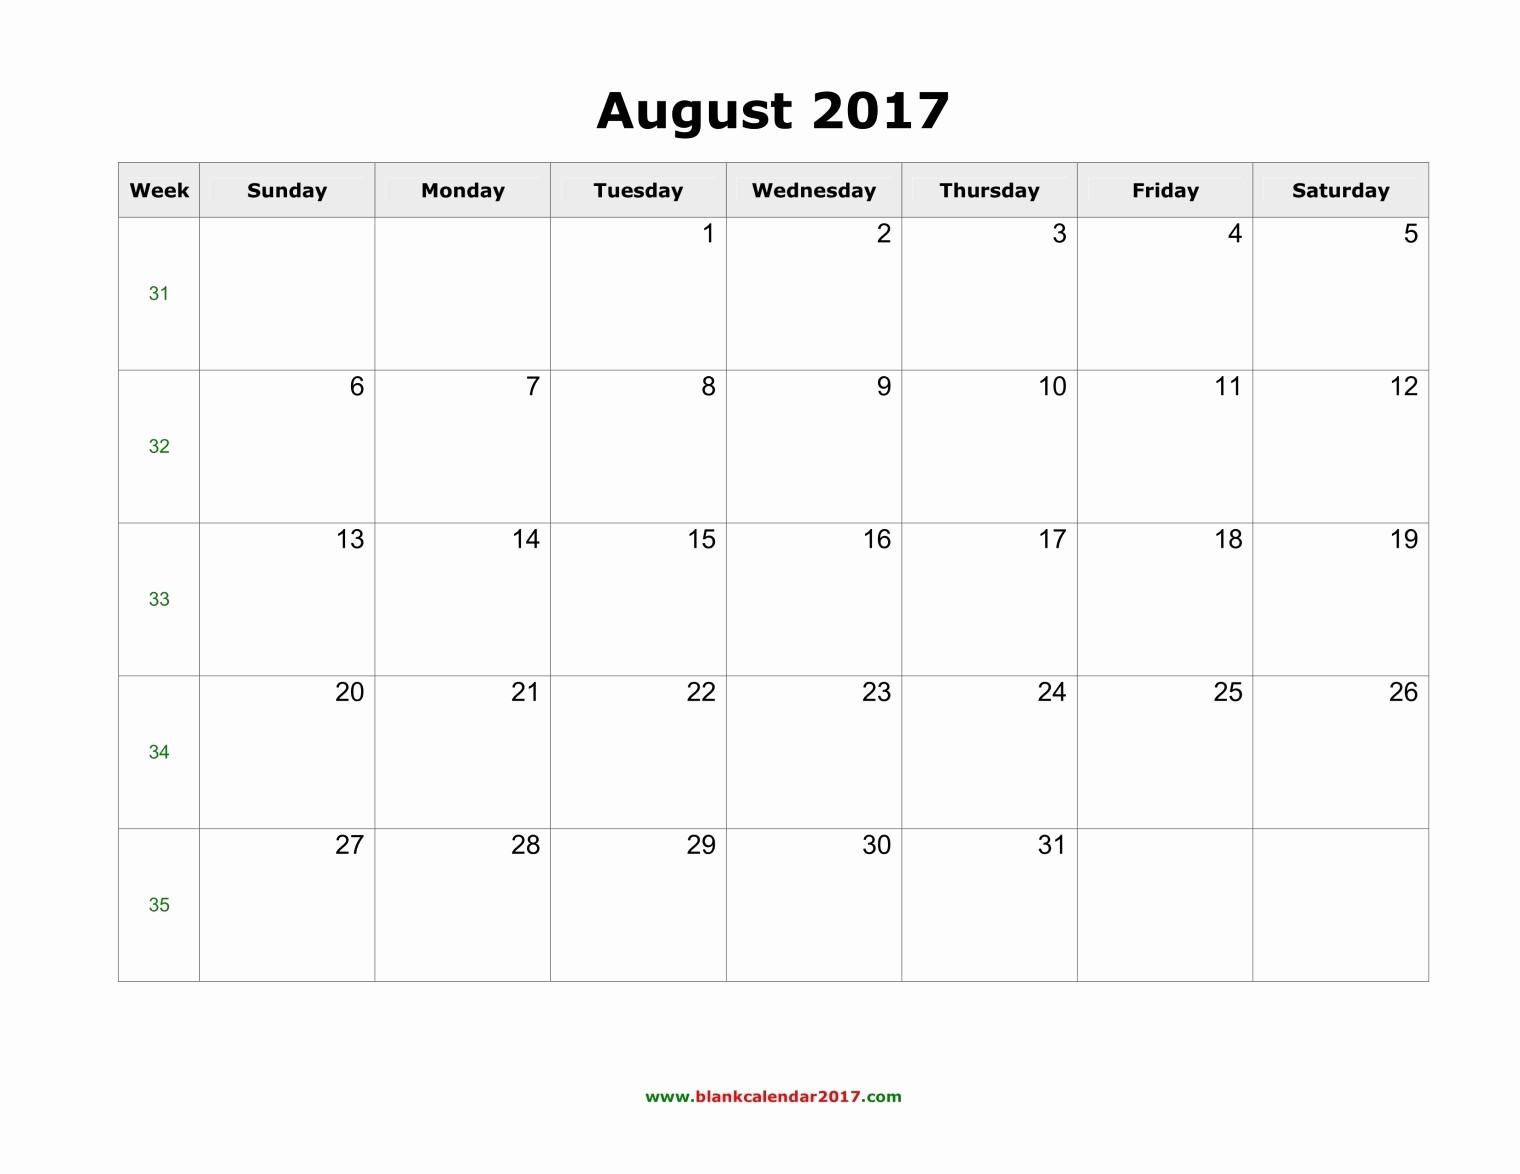 2017 Calendar with Holidays Template Awesome August 2017 Calendar with Holidays